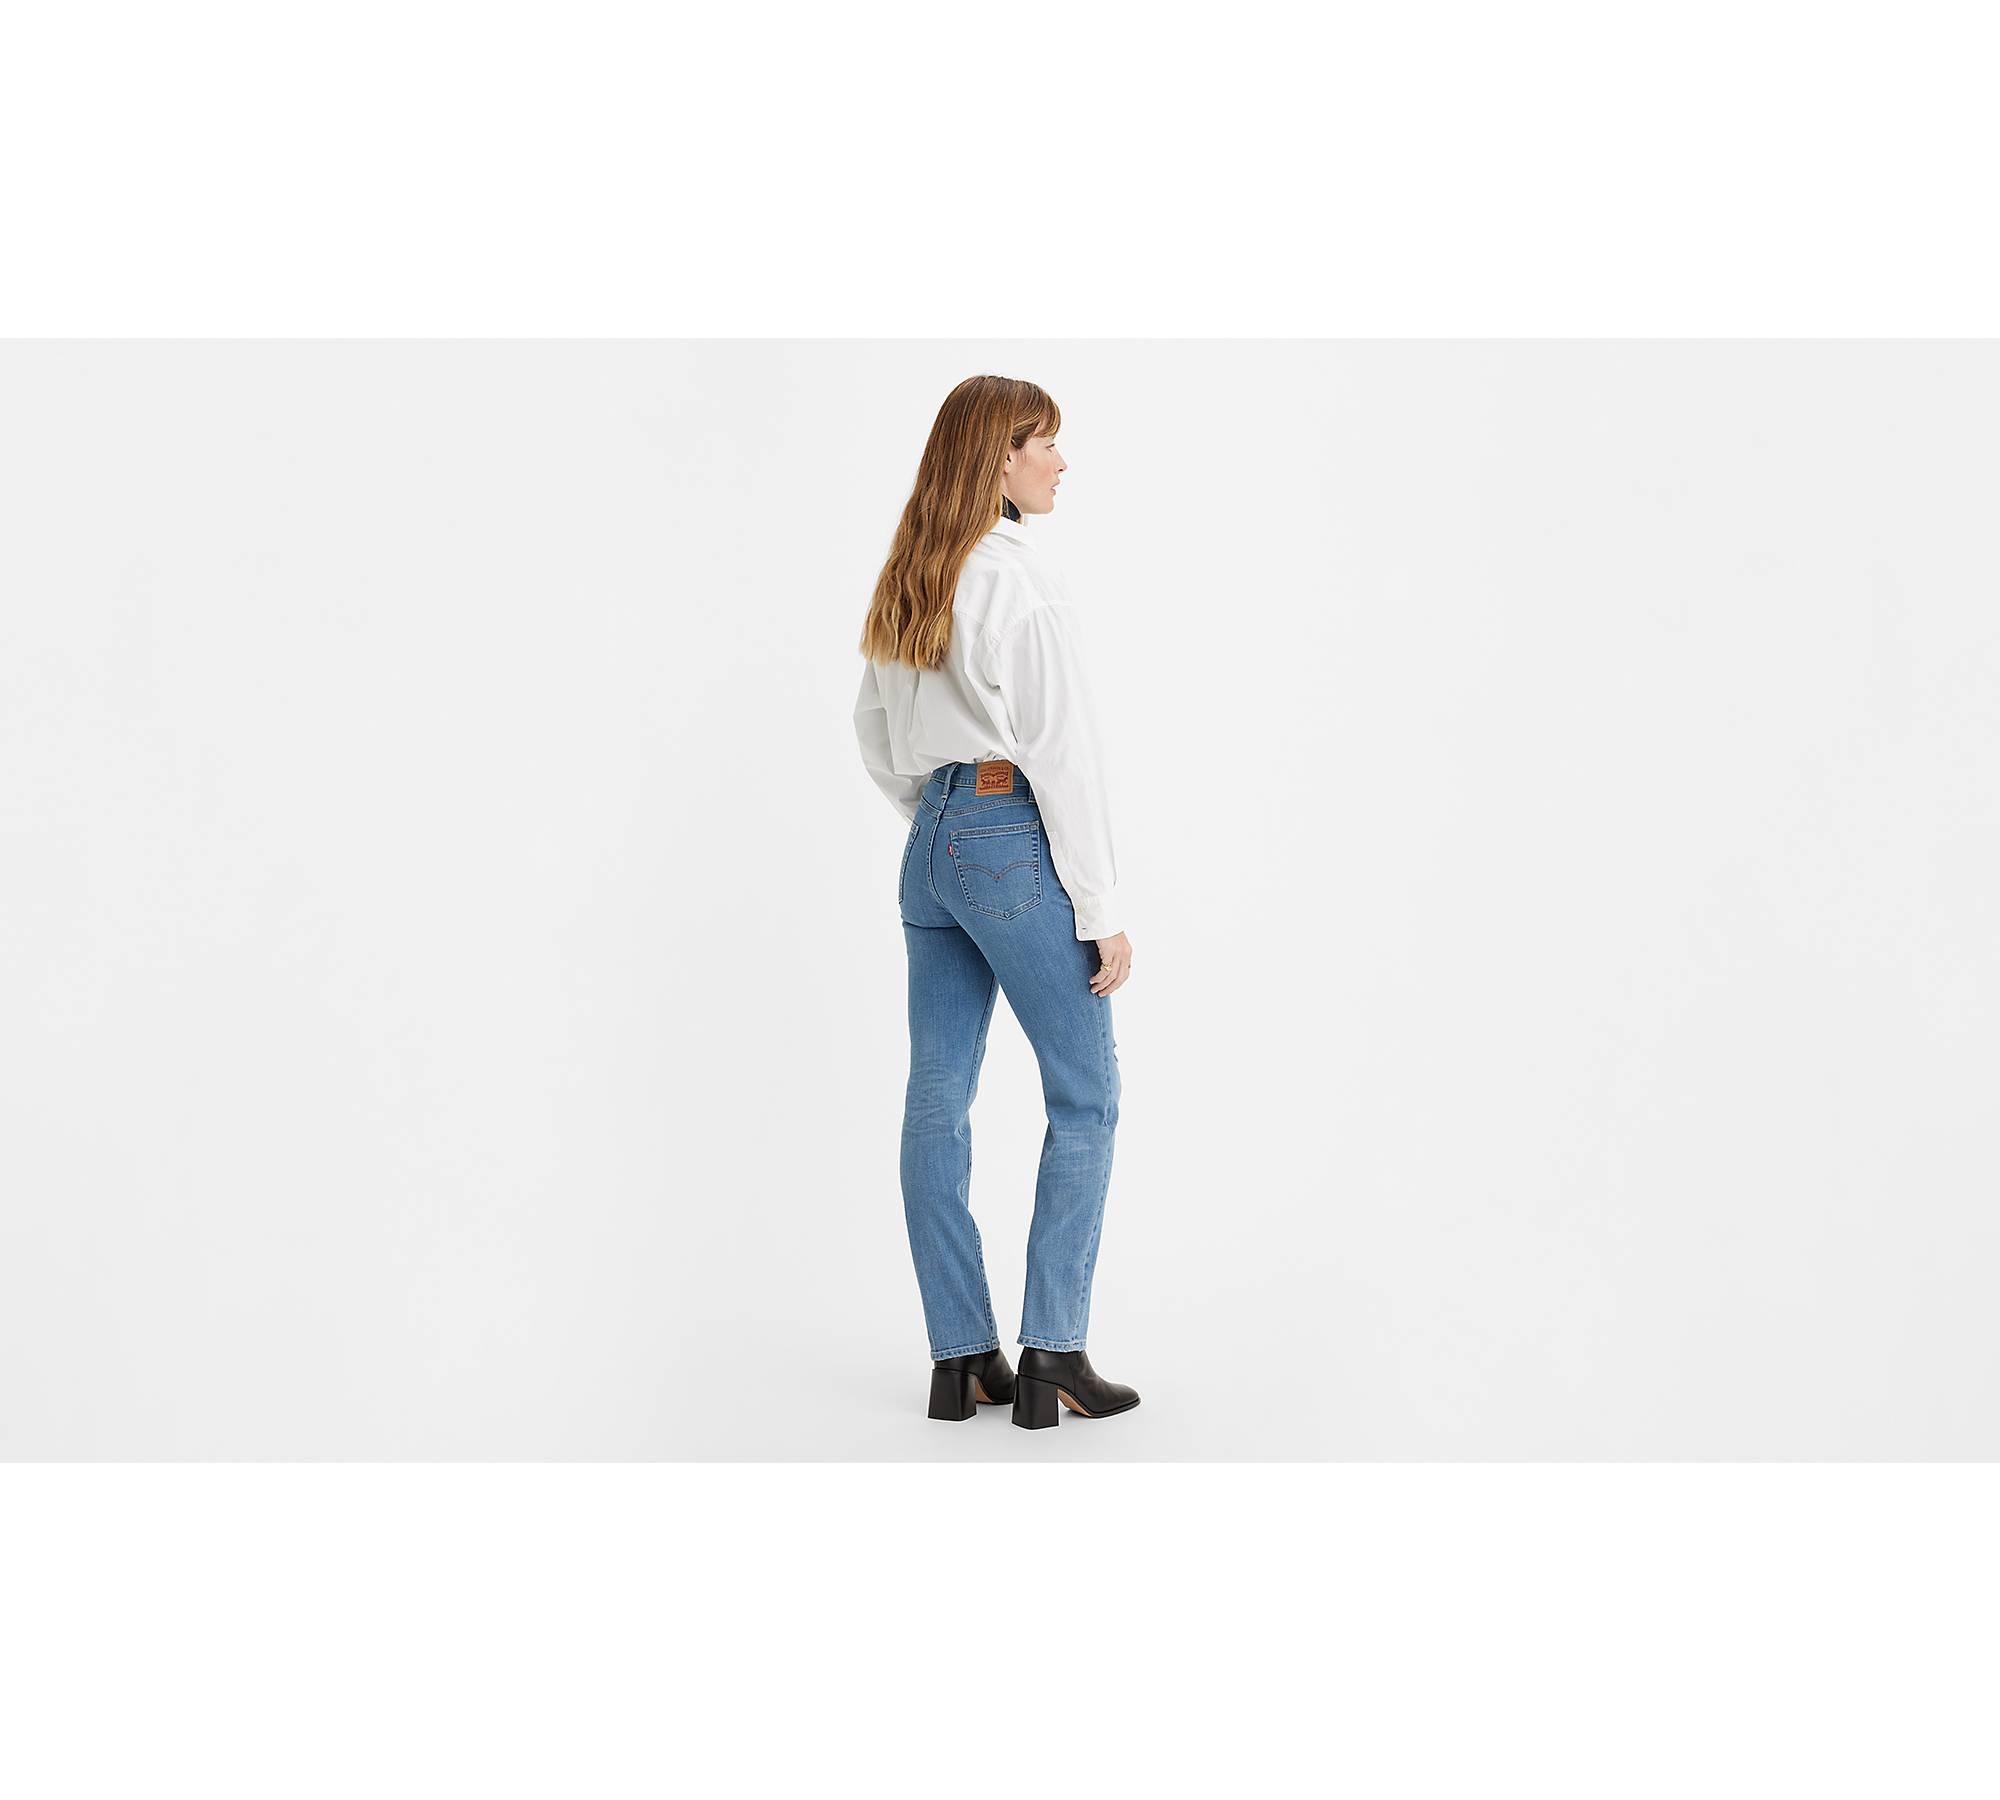 Levi's® Women's 724™ High-rise Straight Jeans : Target